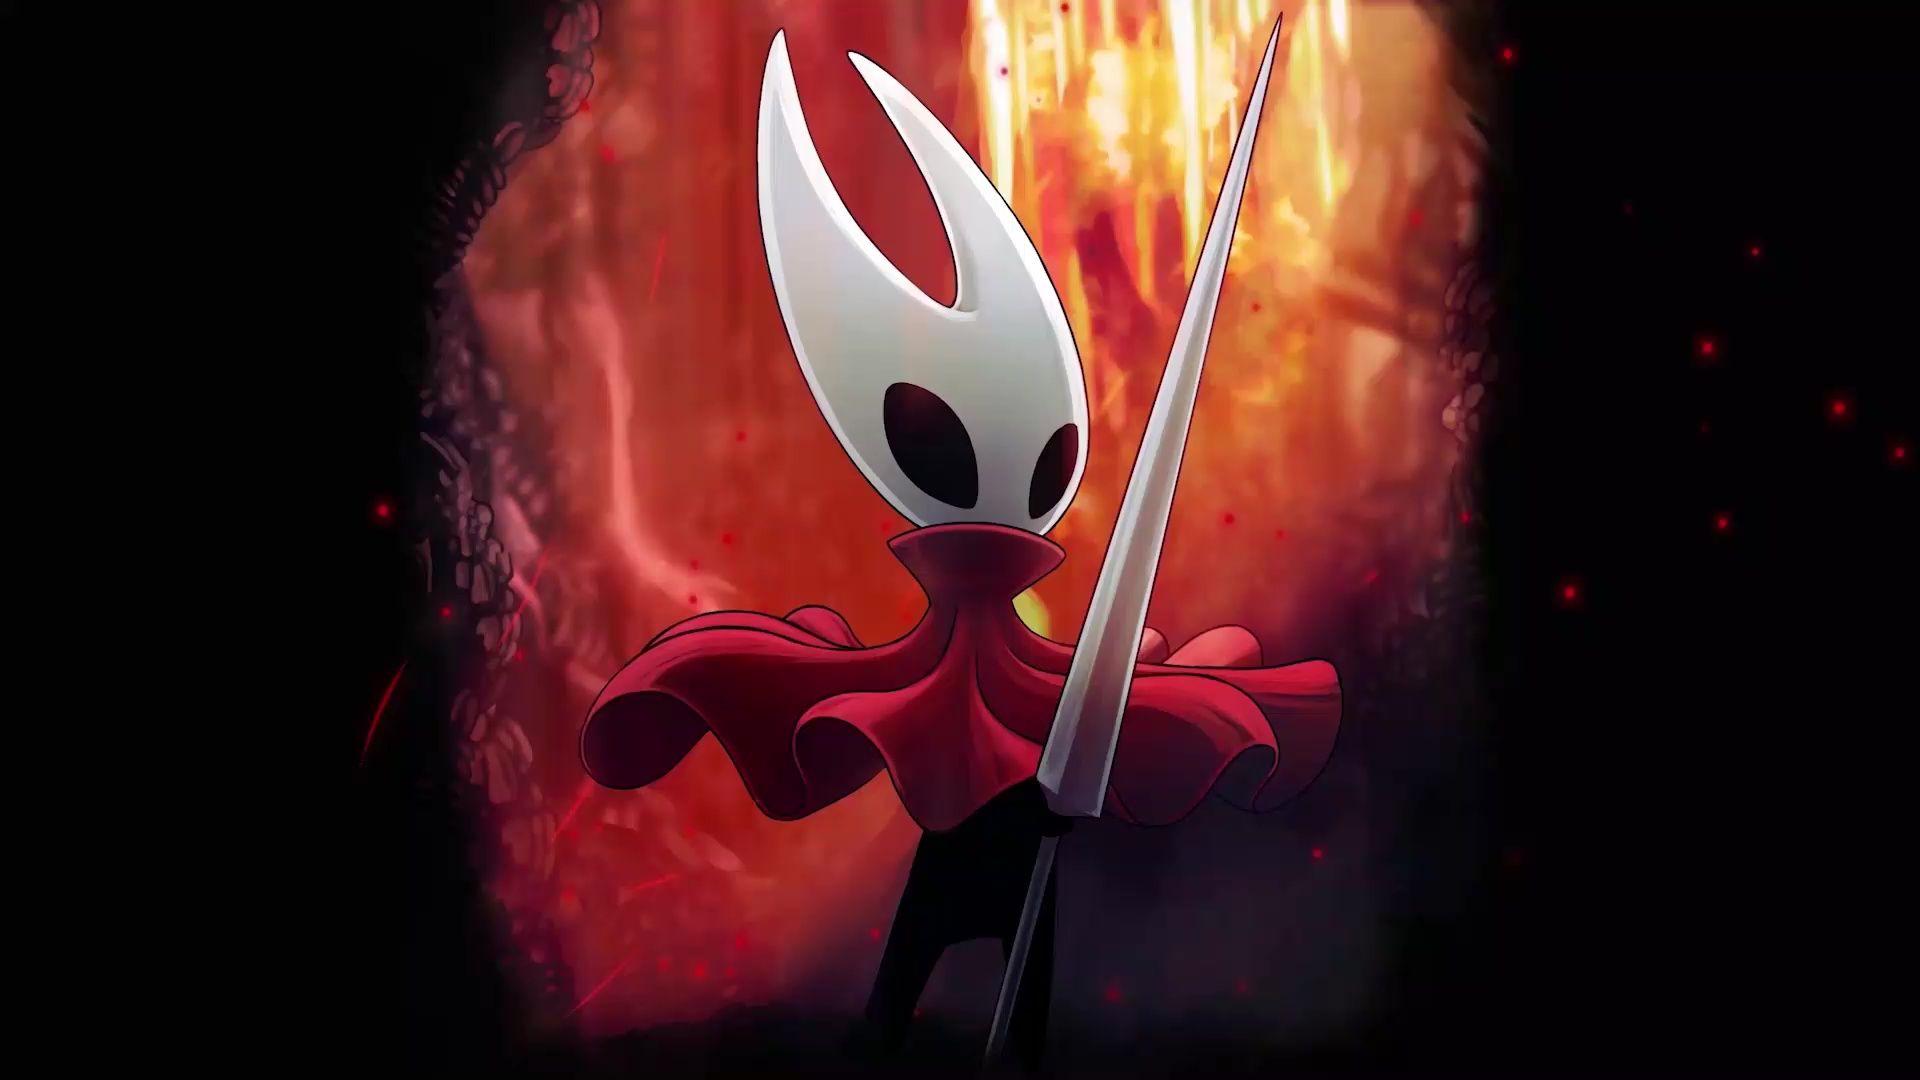 hollow knight fanfiction